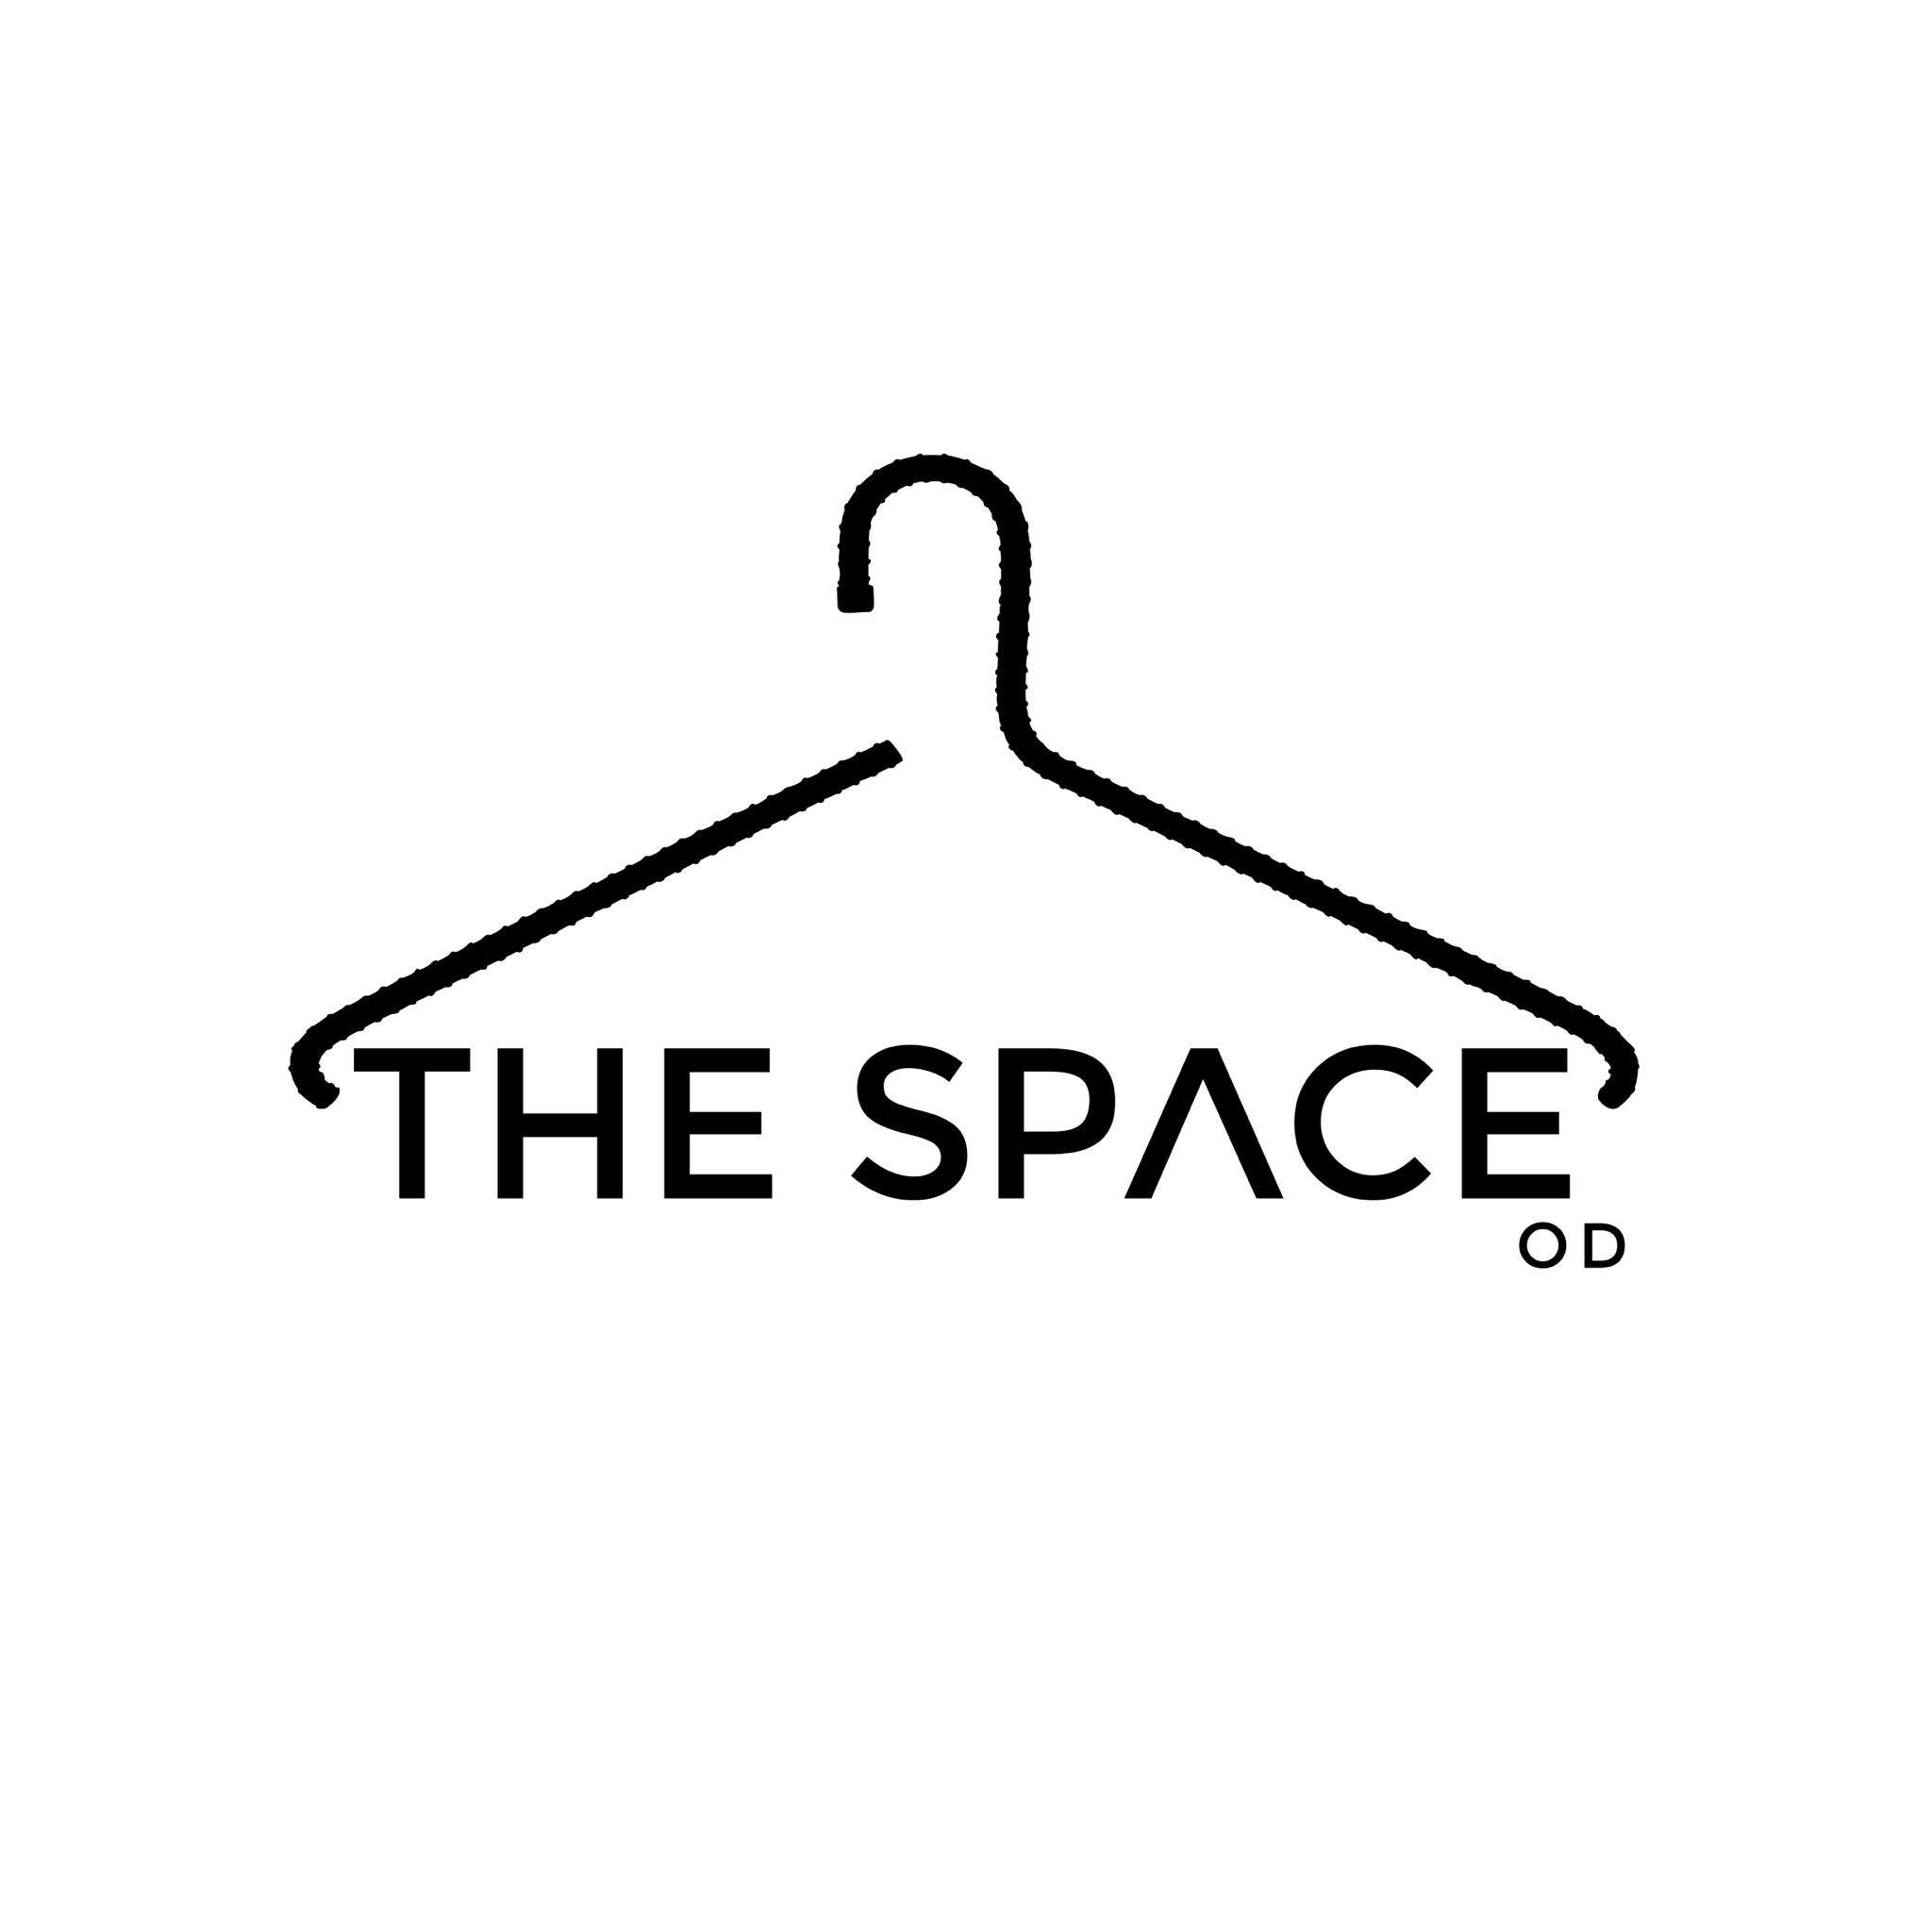 The space_OD